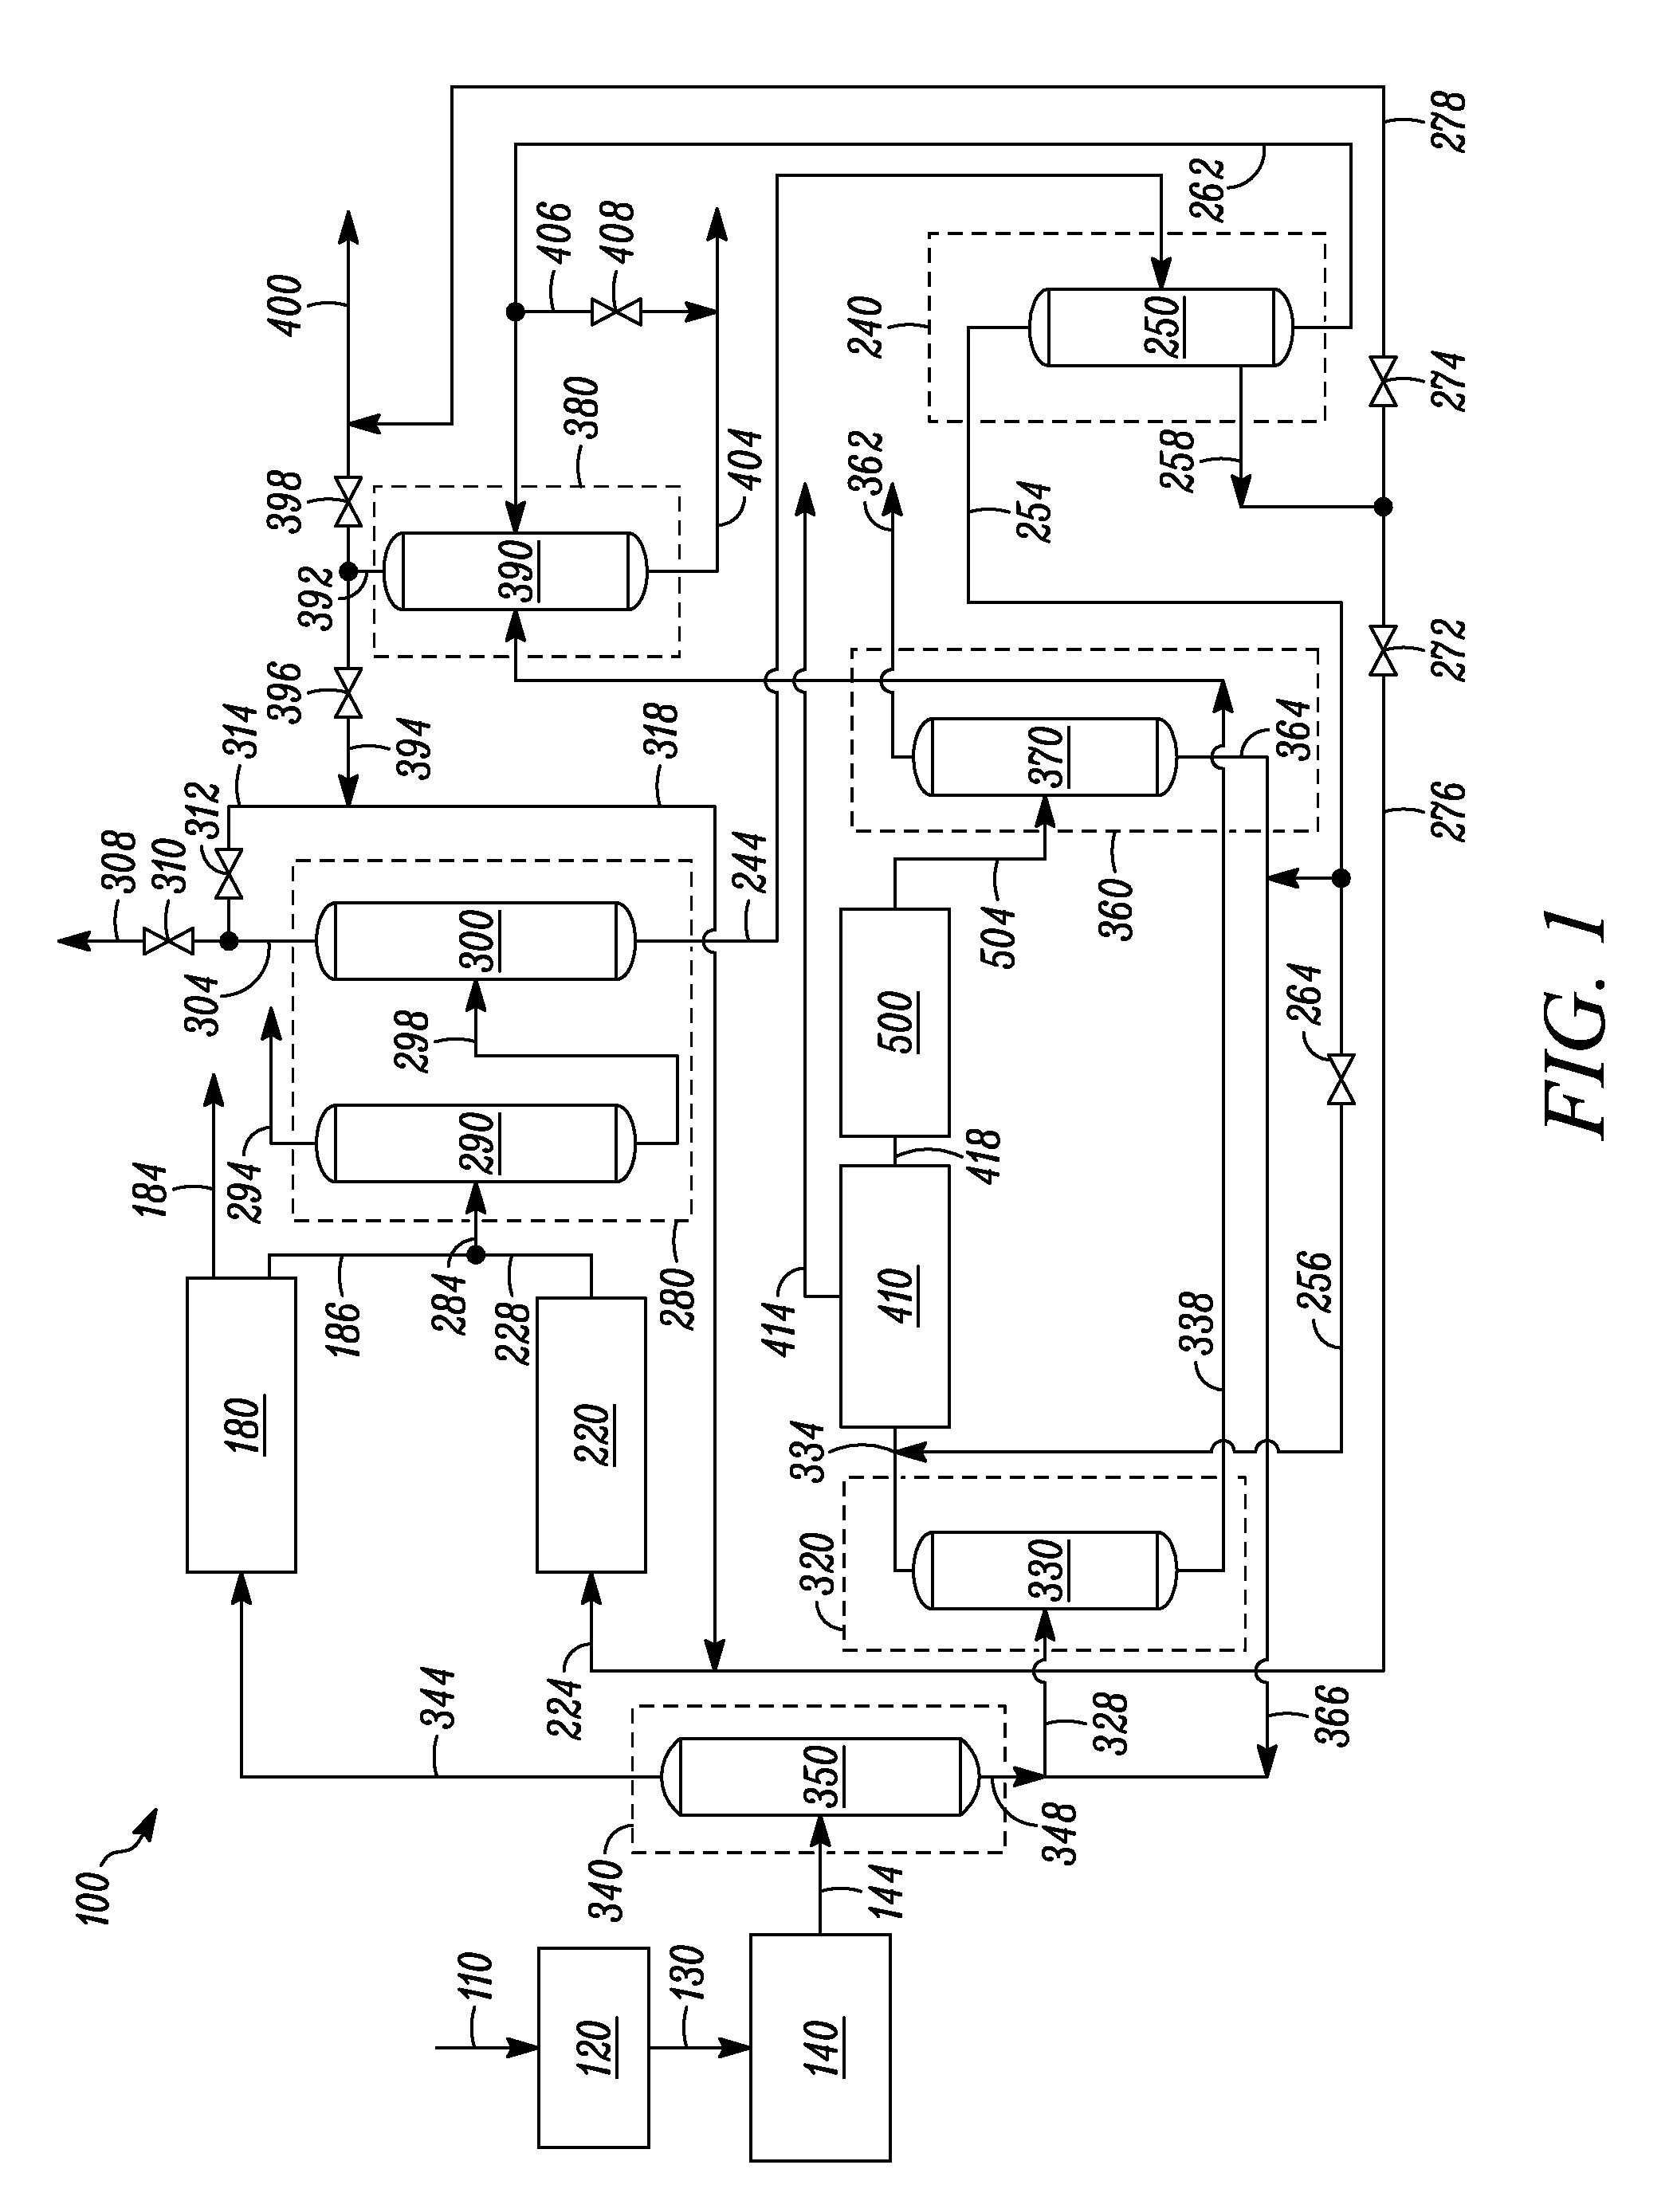 Method of altering a feed to a reaction zone